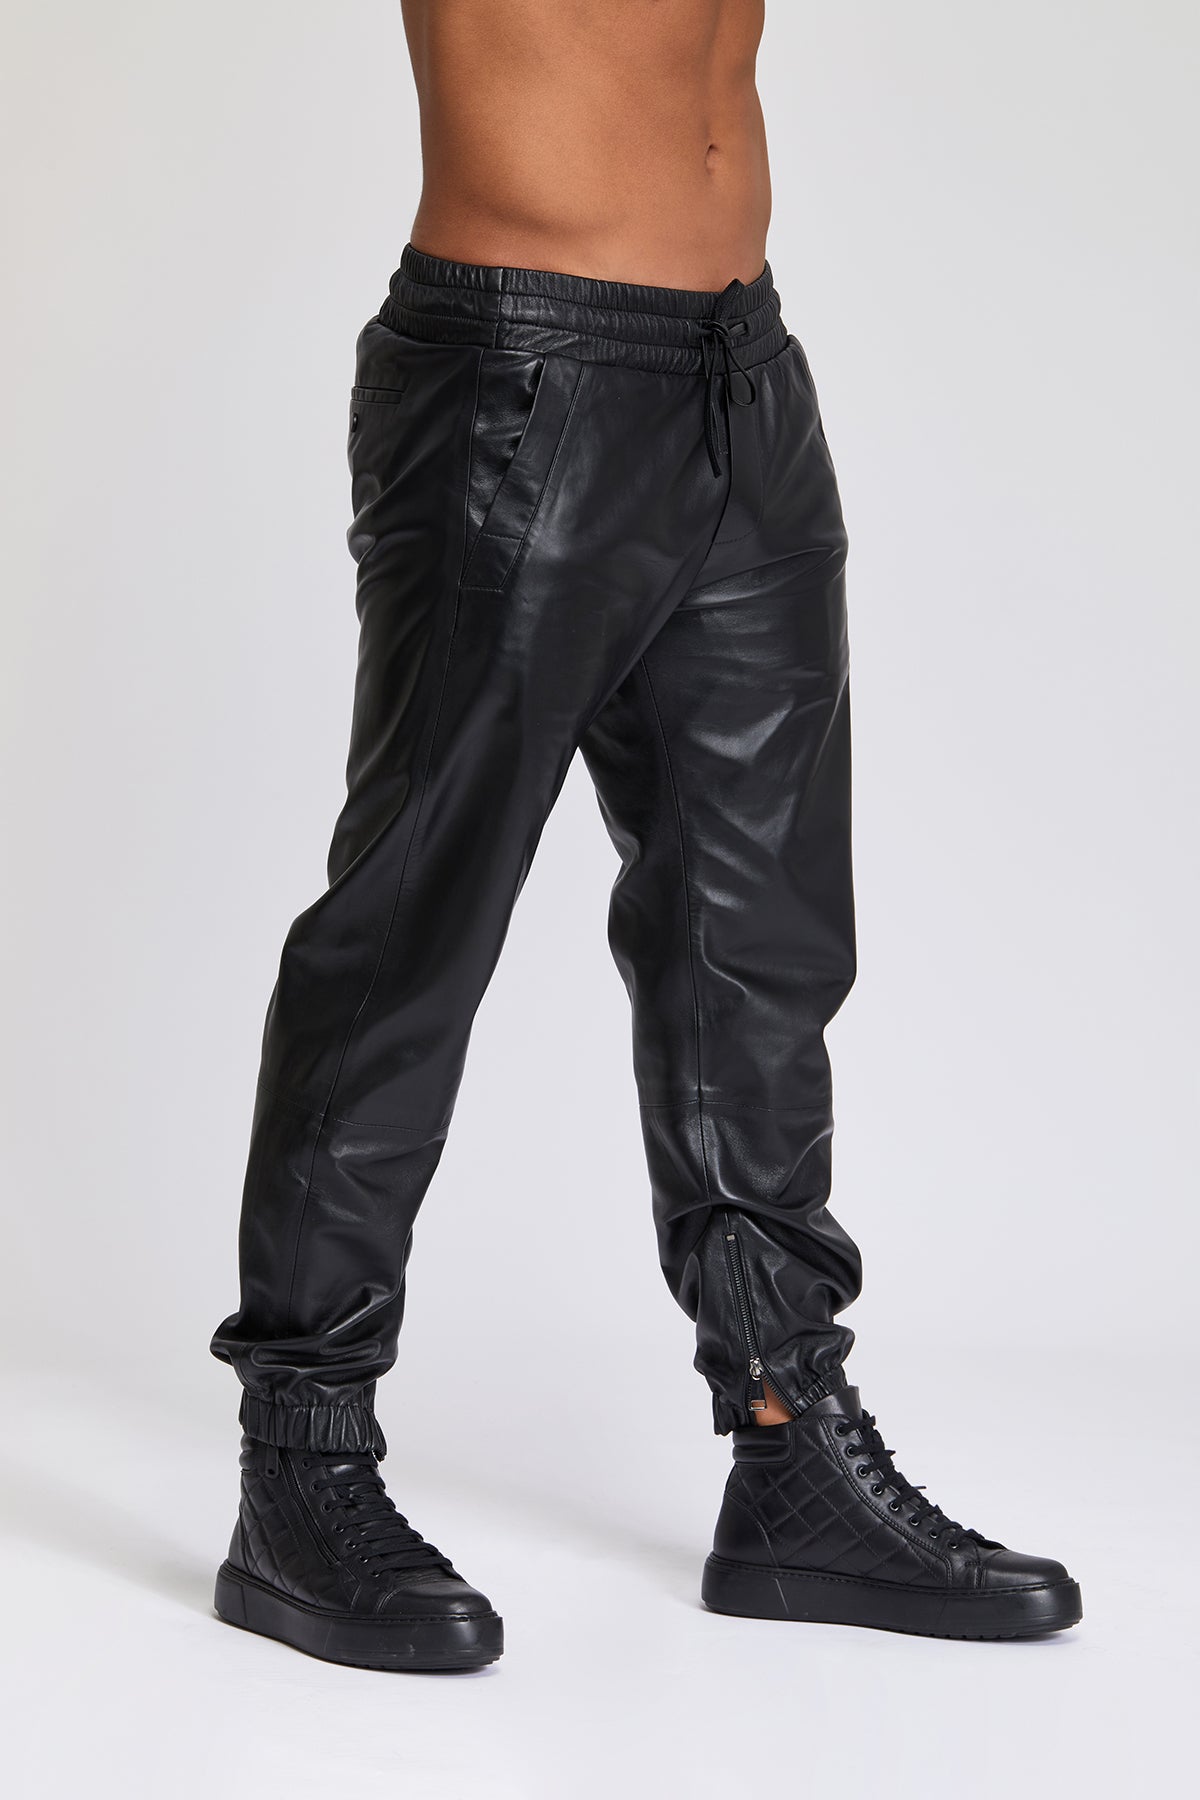 Men's leather pants. 100 % real Turkish leather. Lambskin. Soft. Great quality. Regular fit. Elastic waistband. Side pockets. Luxurious.